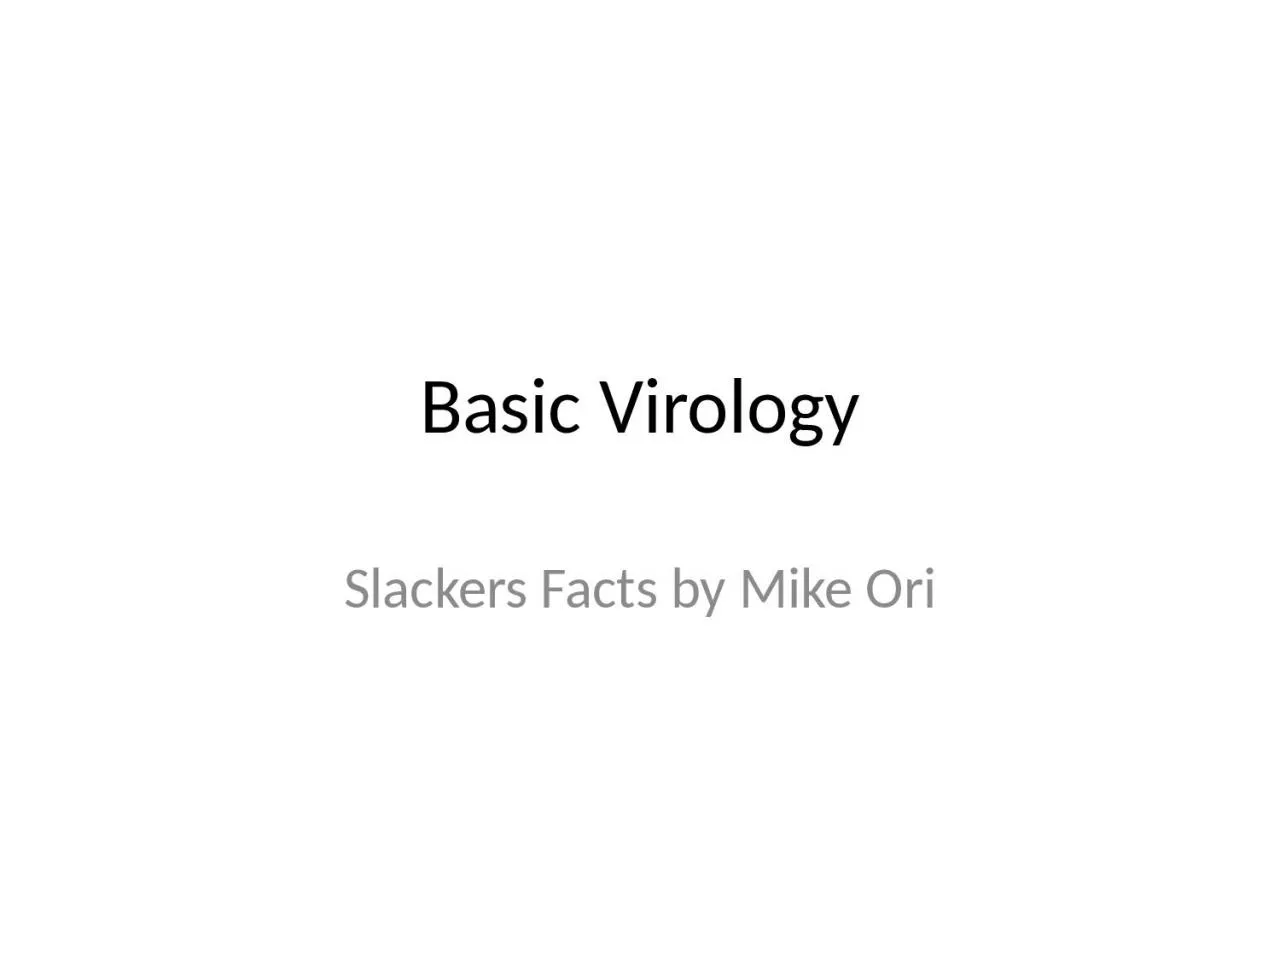 Basic Virology Slackers Facts by Mike